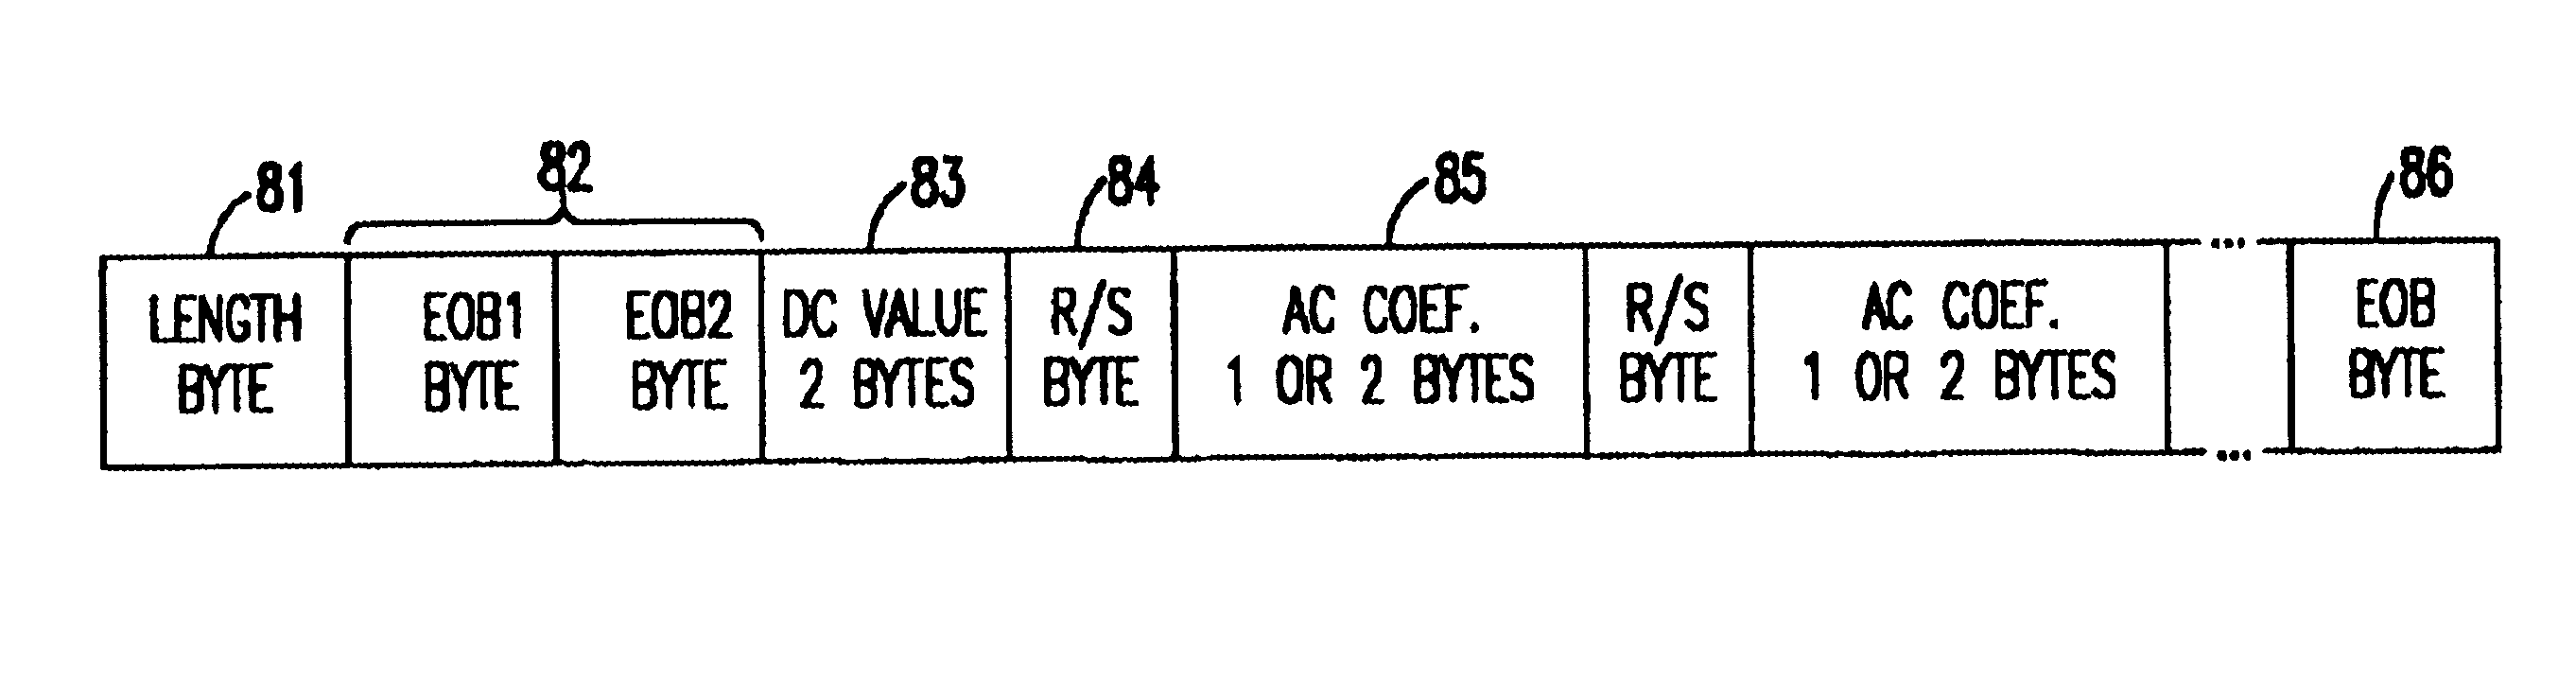 JPEG packed block structure